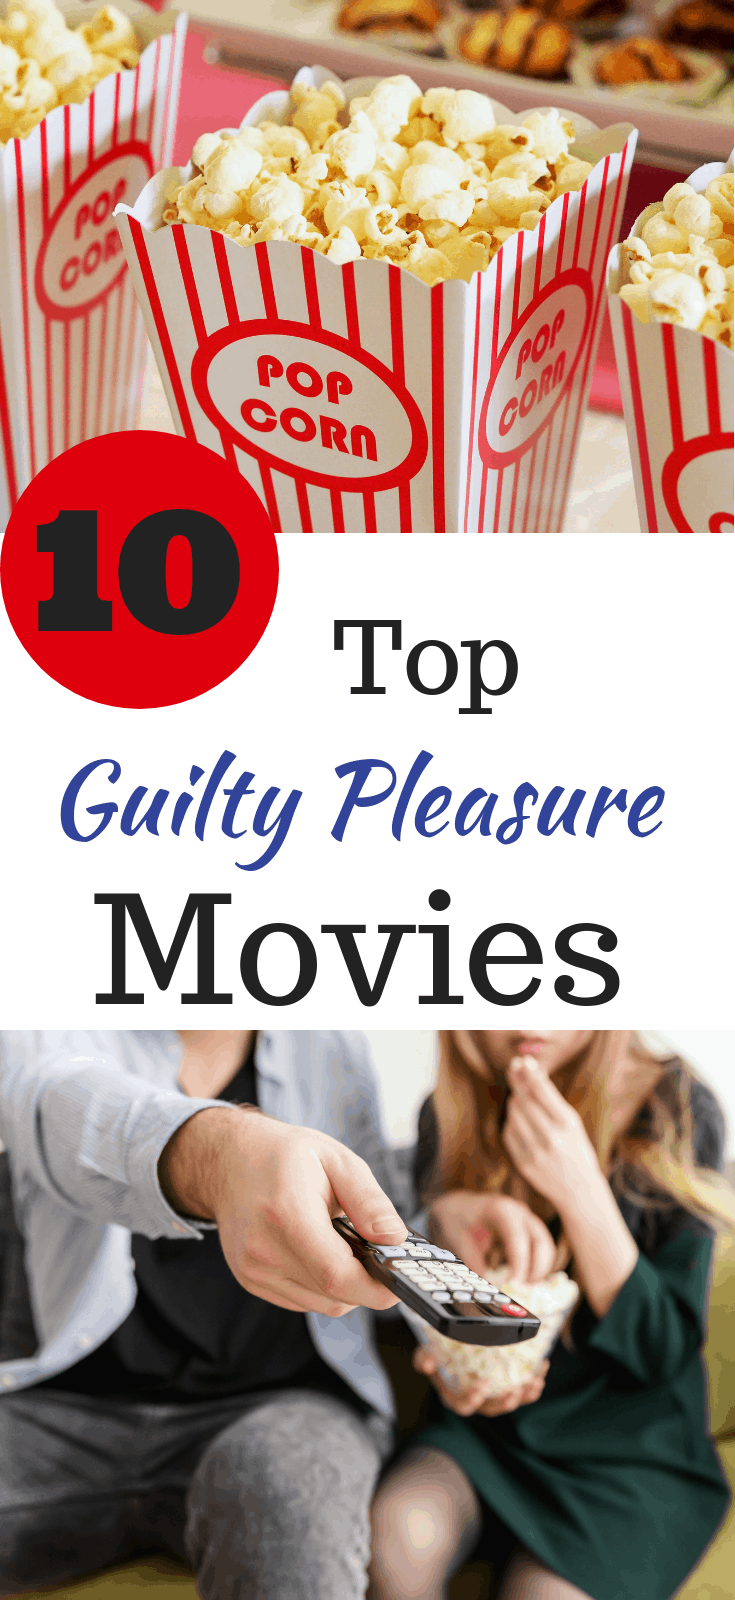 My top 10 list of guilty pleasure movies I am embarrassed to admit I love. The films are easy to follow, have happy endings, and always leave you feeling better about the day. #maternityleave #movies